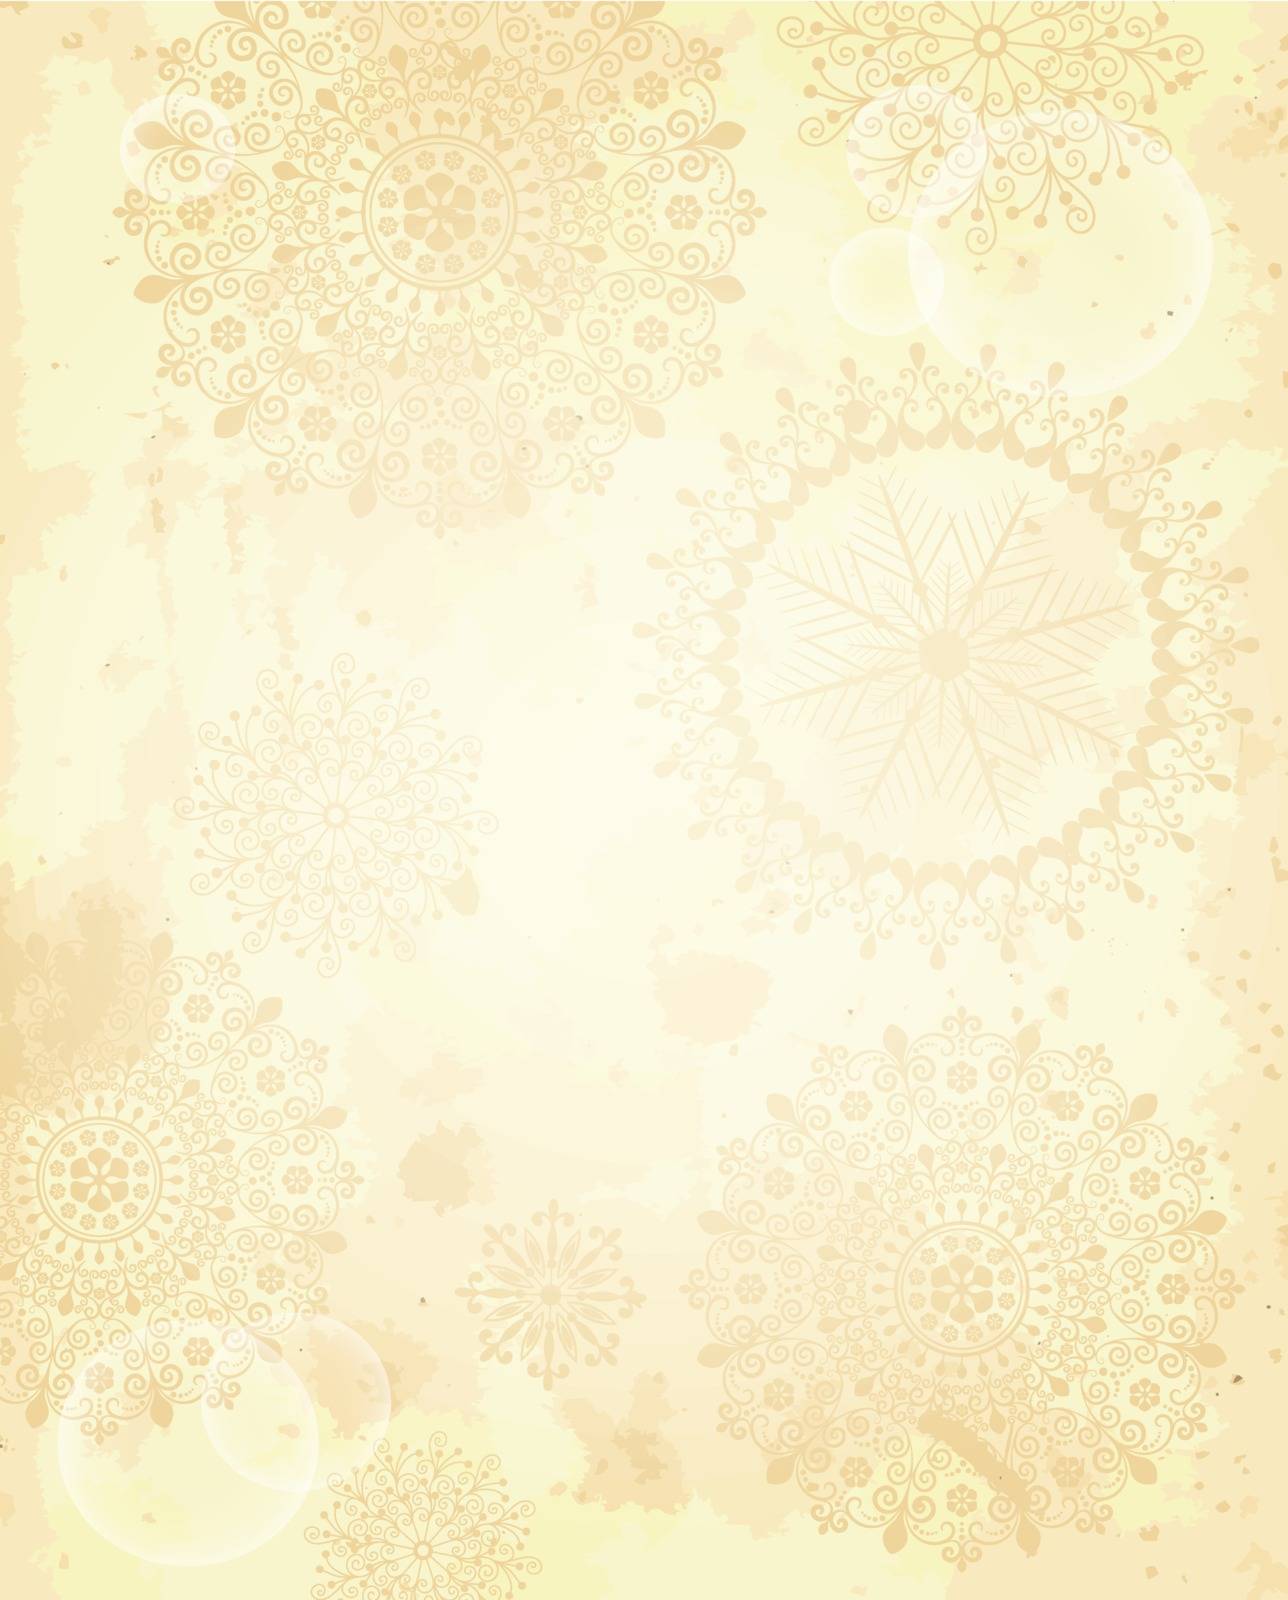 Grungy christmas paper with snowflakes (vector eps 10)